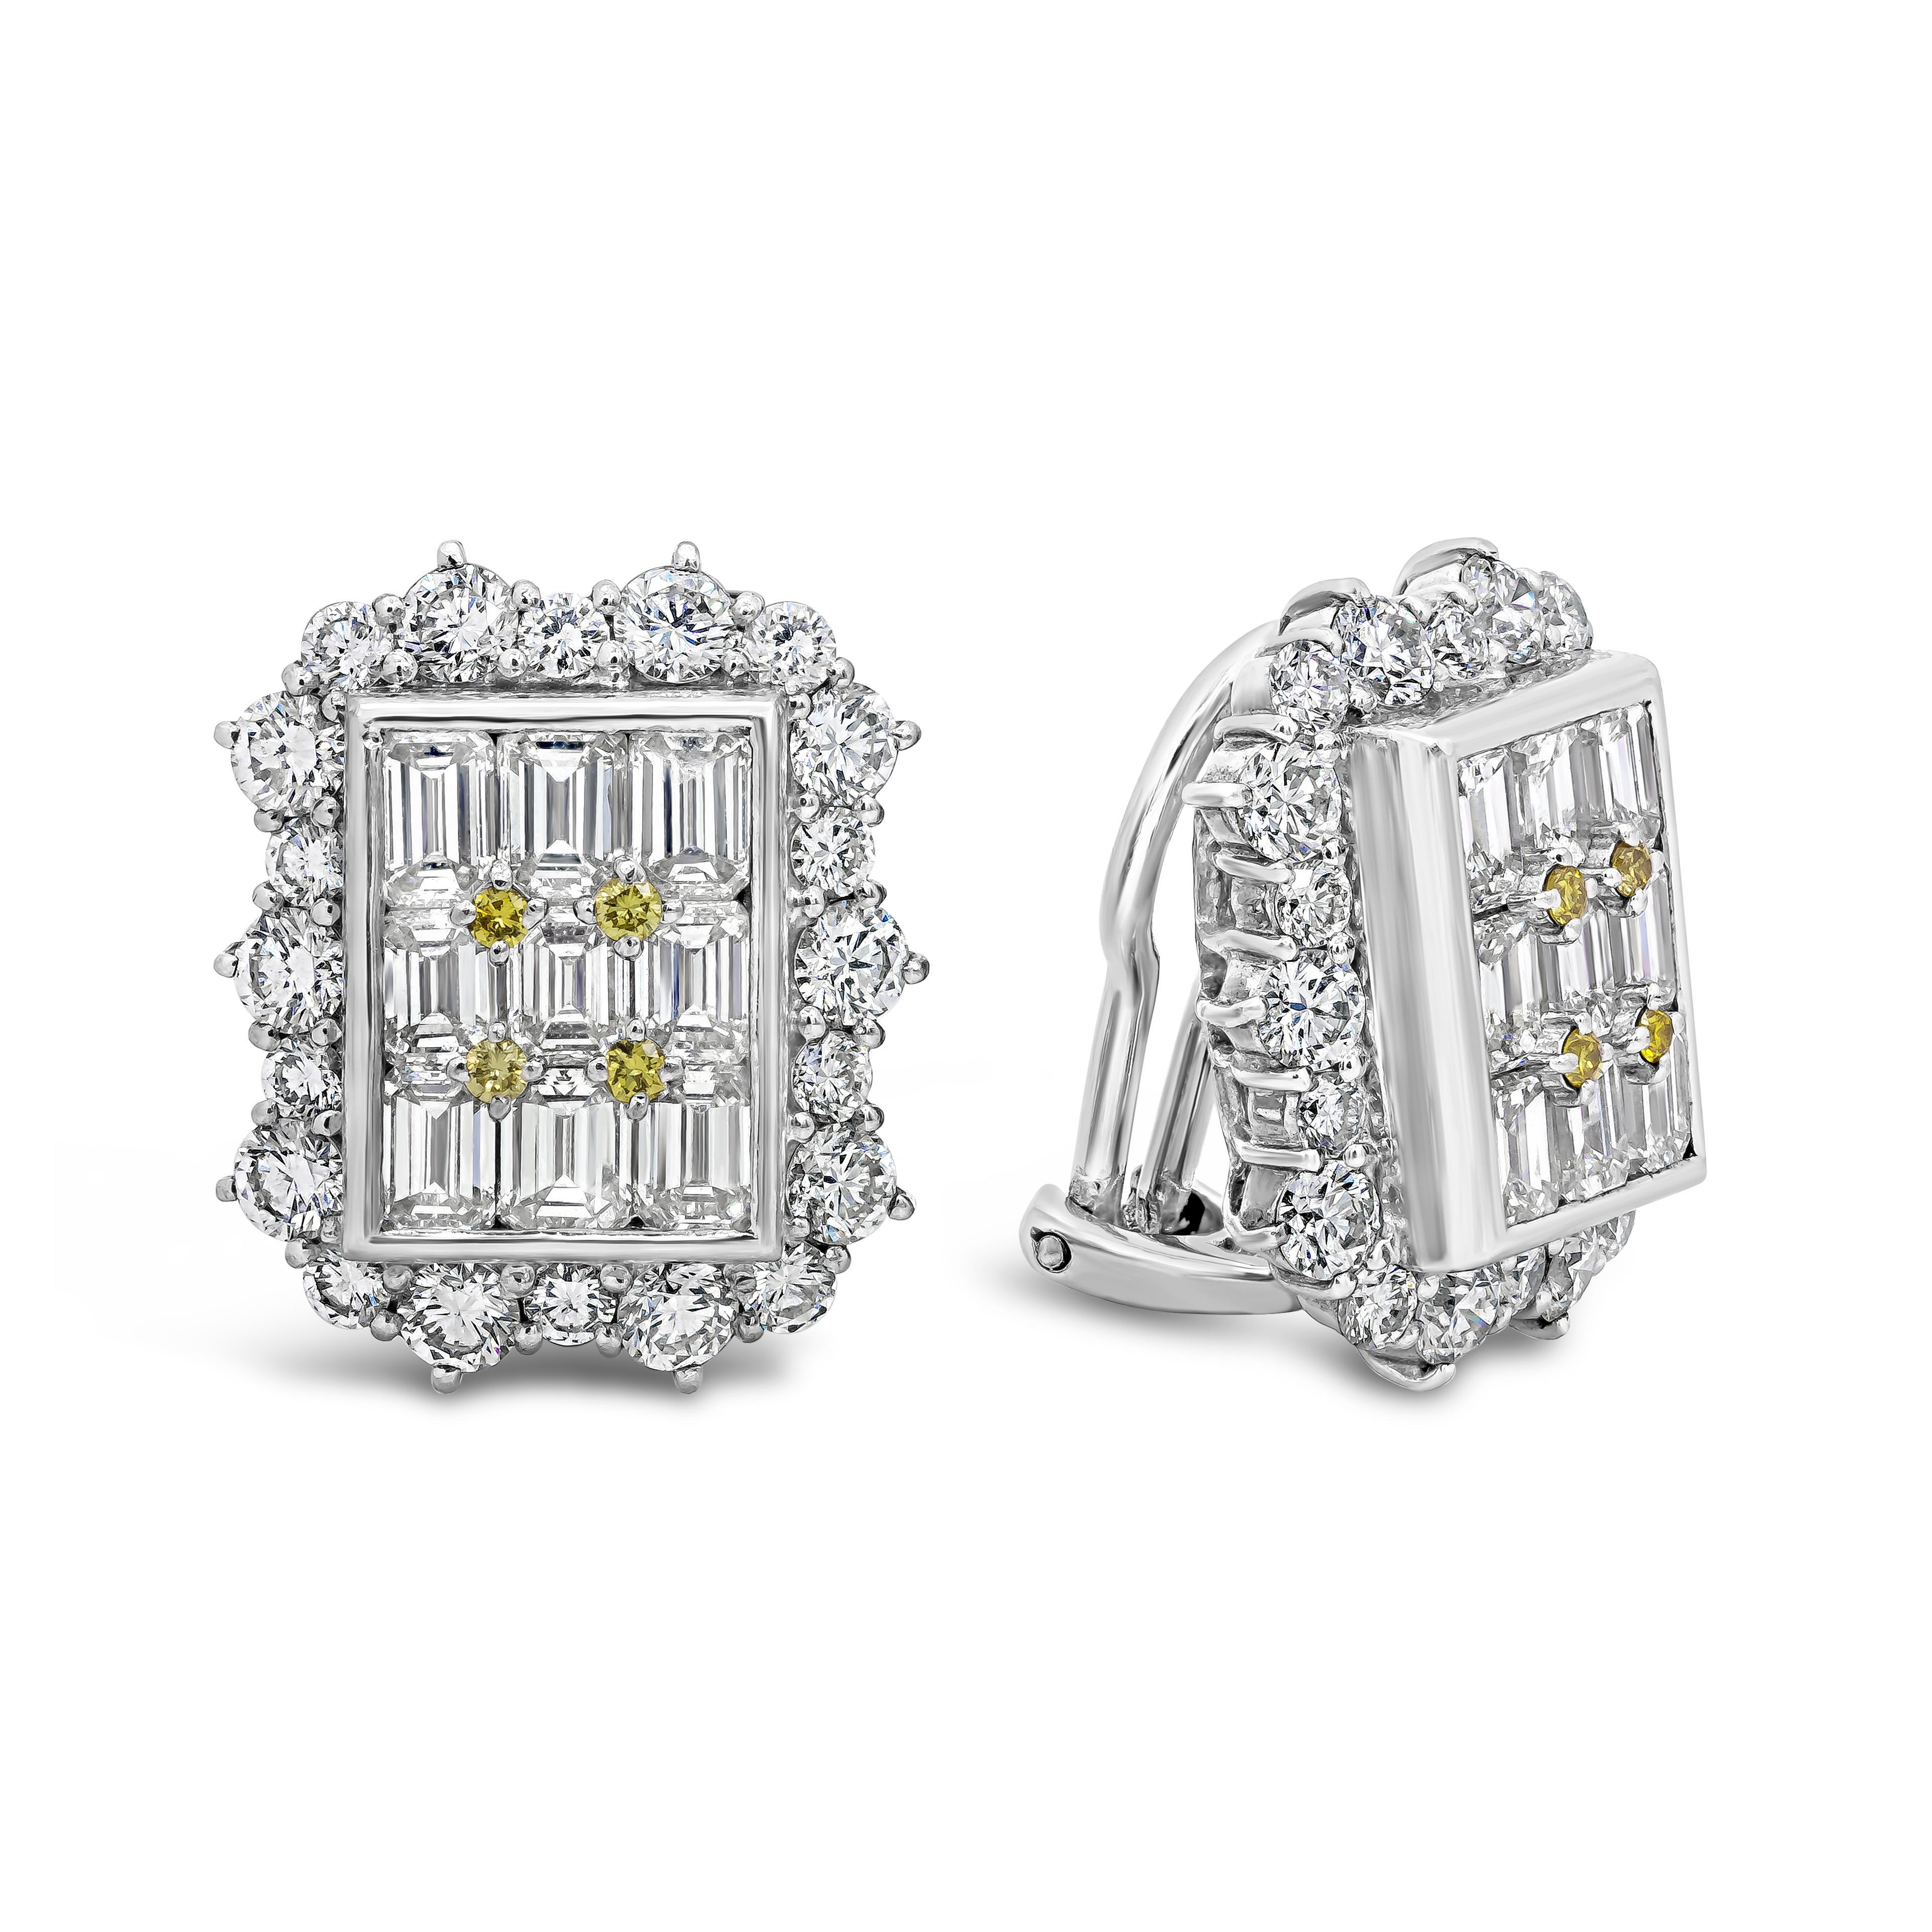 This simple and chic earrings showcases a cluster of mixed diamonds weighing 5.20 carats total. Emerald cut diamonds invisibly set in a rectangular shape set in a bezel halo setting with round diamonds. Finely made in Platinum.

Style available in